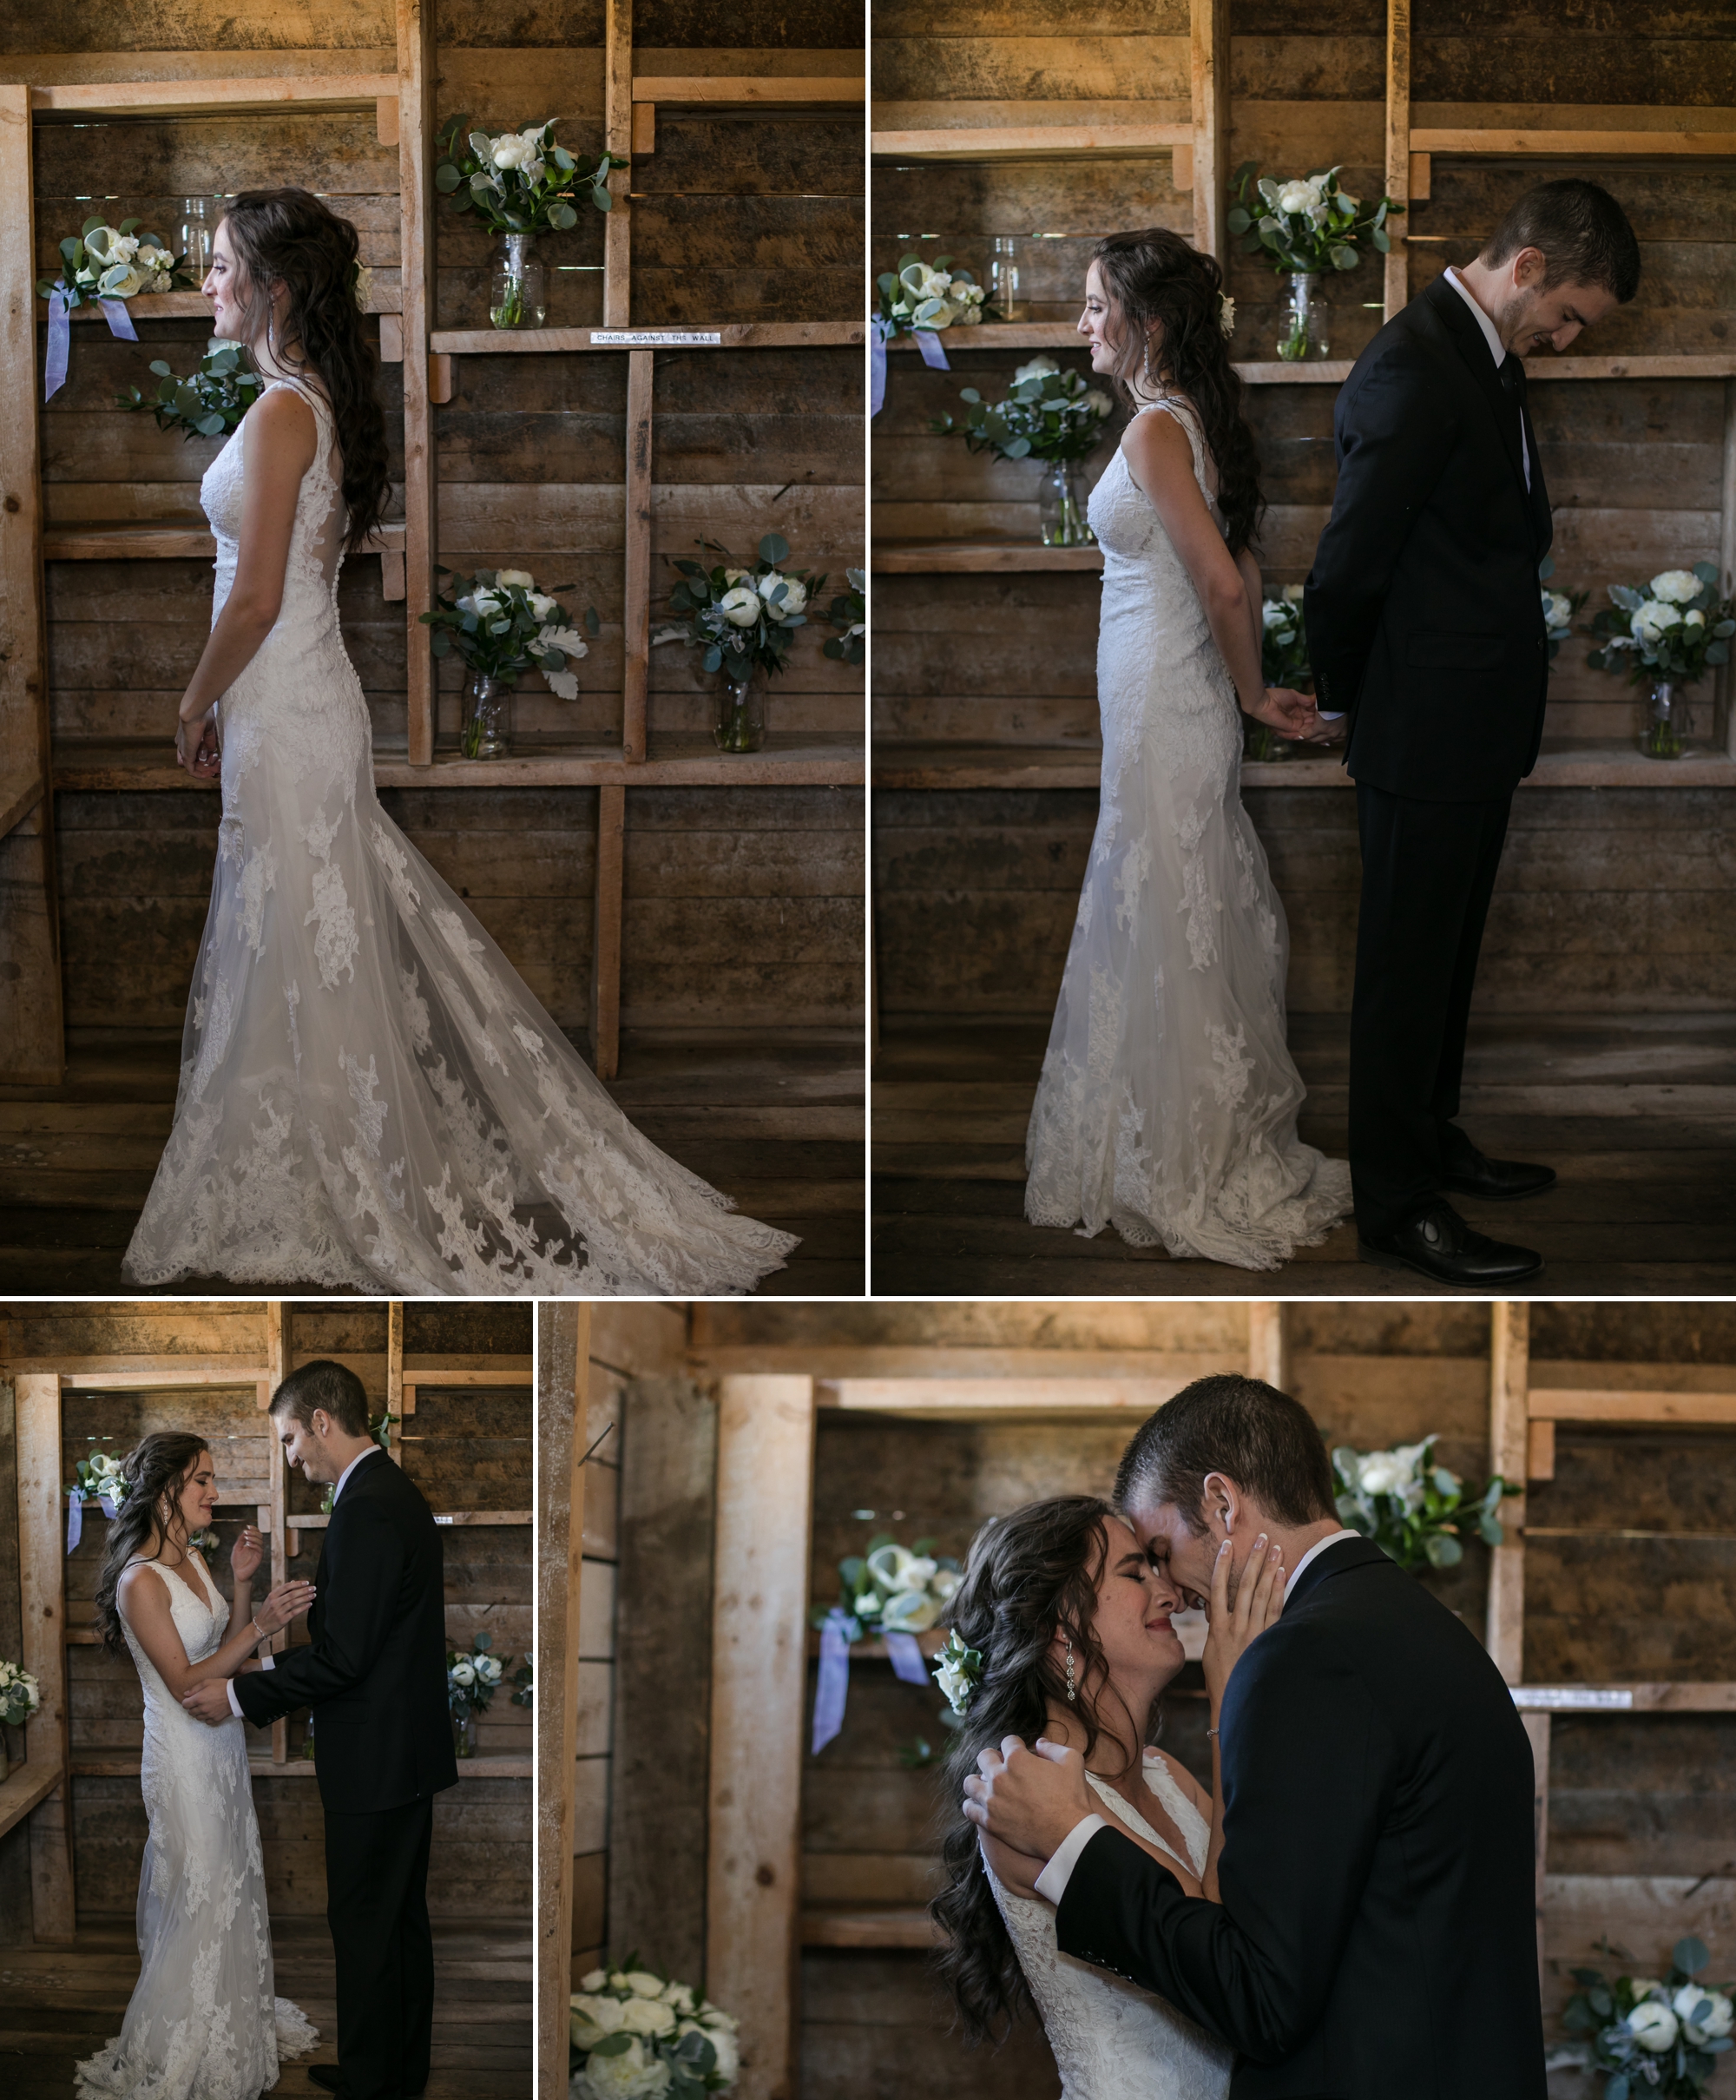 Colorado couple's first look at wedding